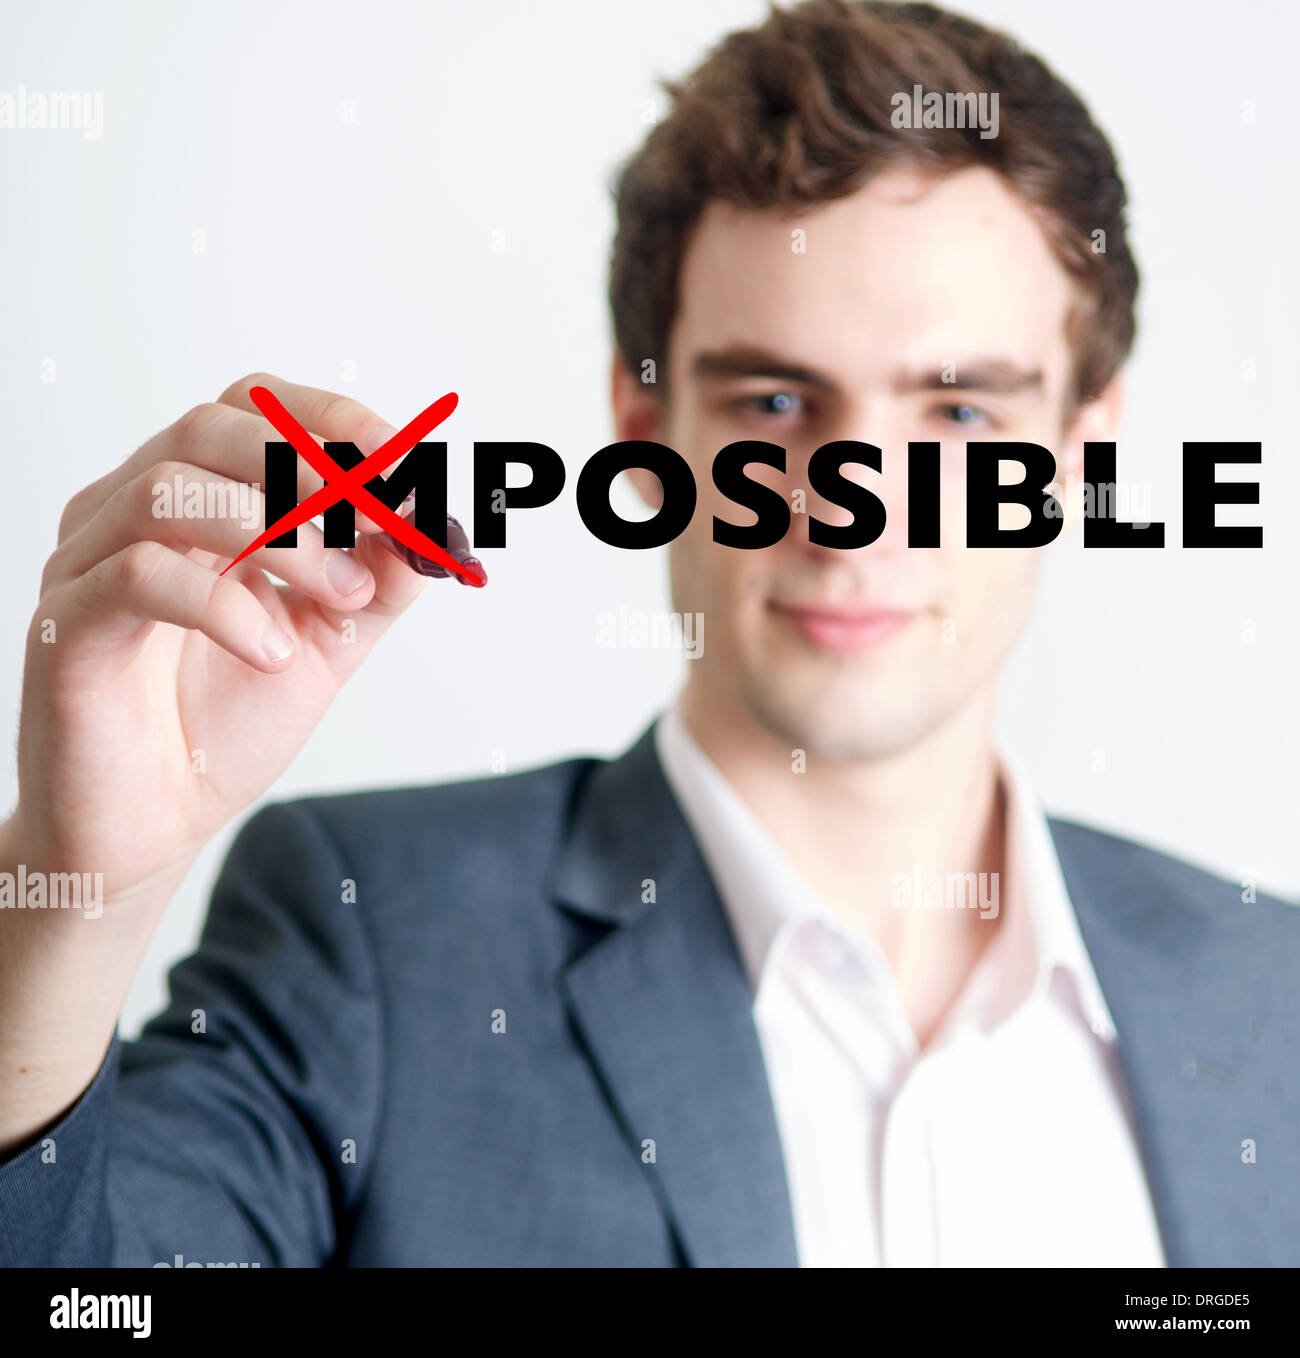 Professional young man crossing out with marker impossible concept Stock Photo